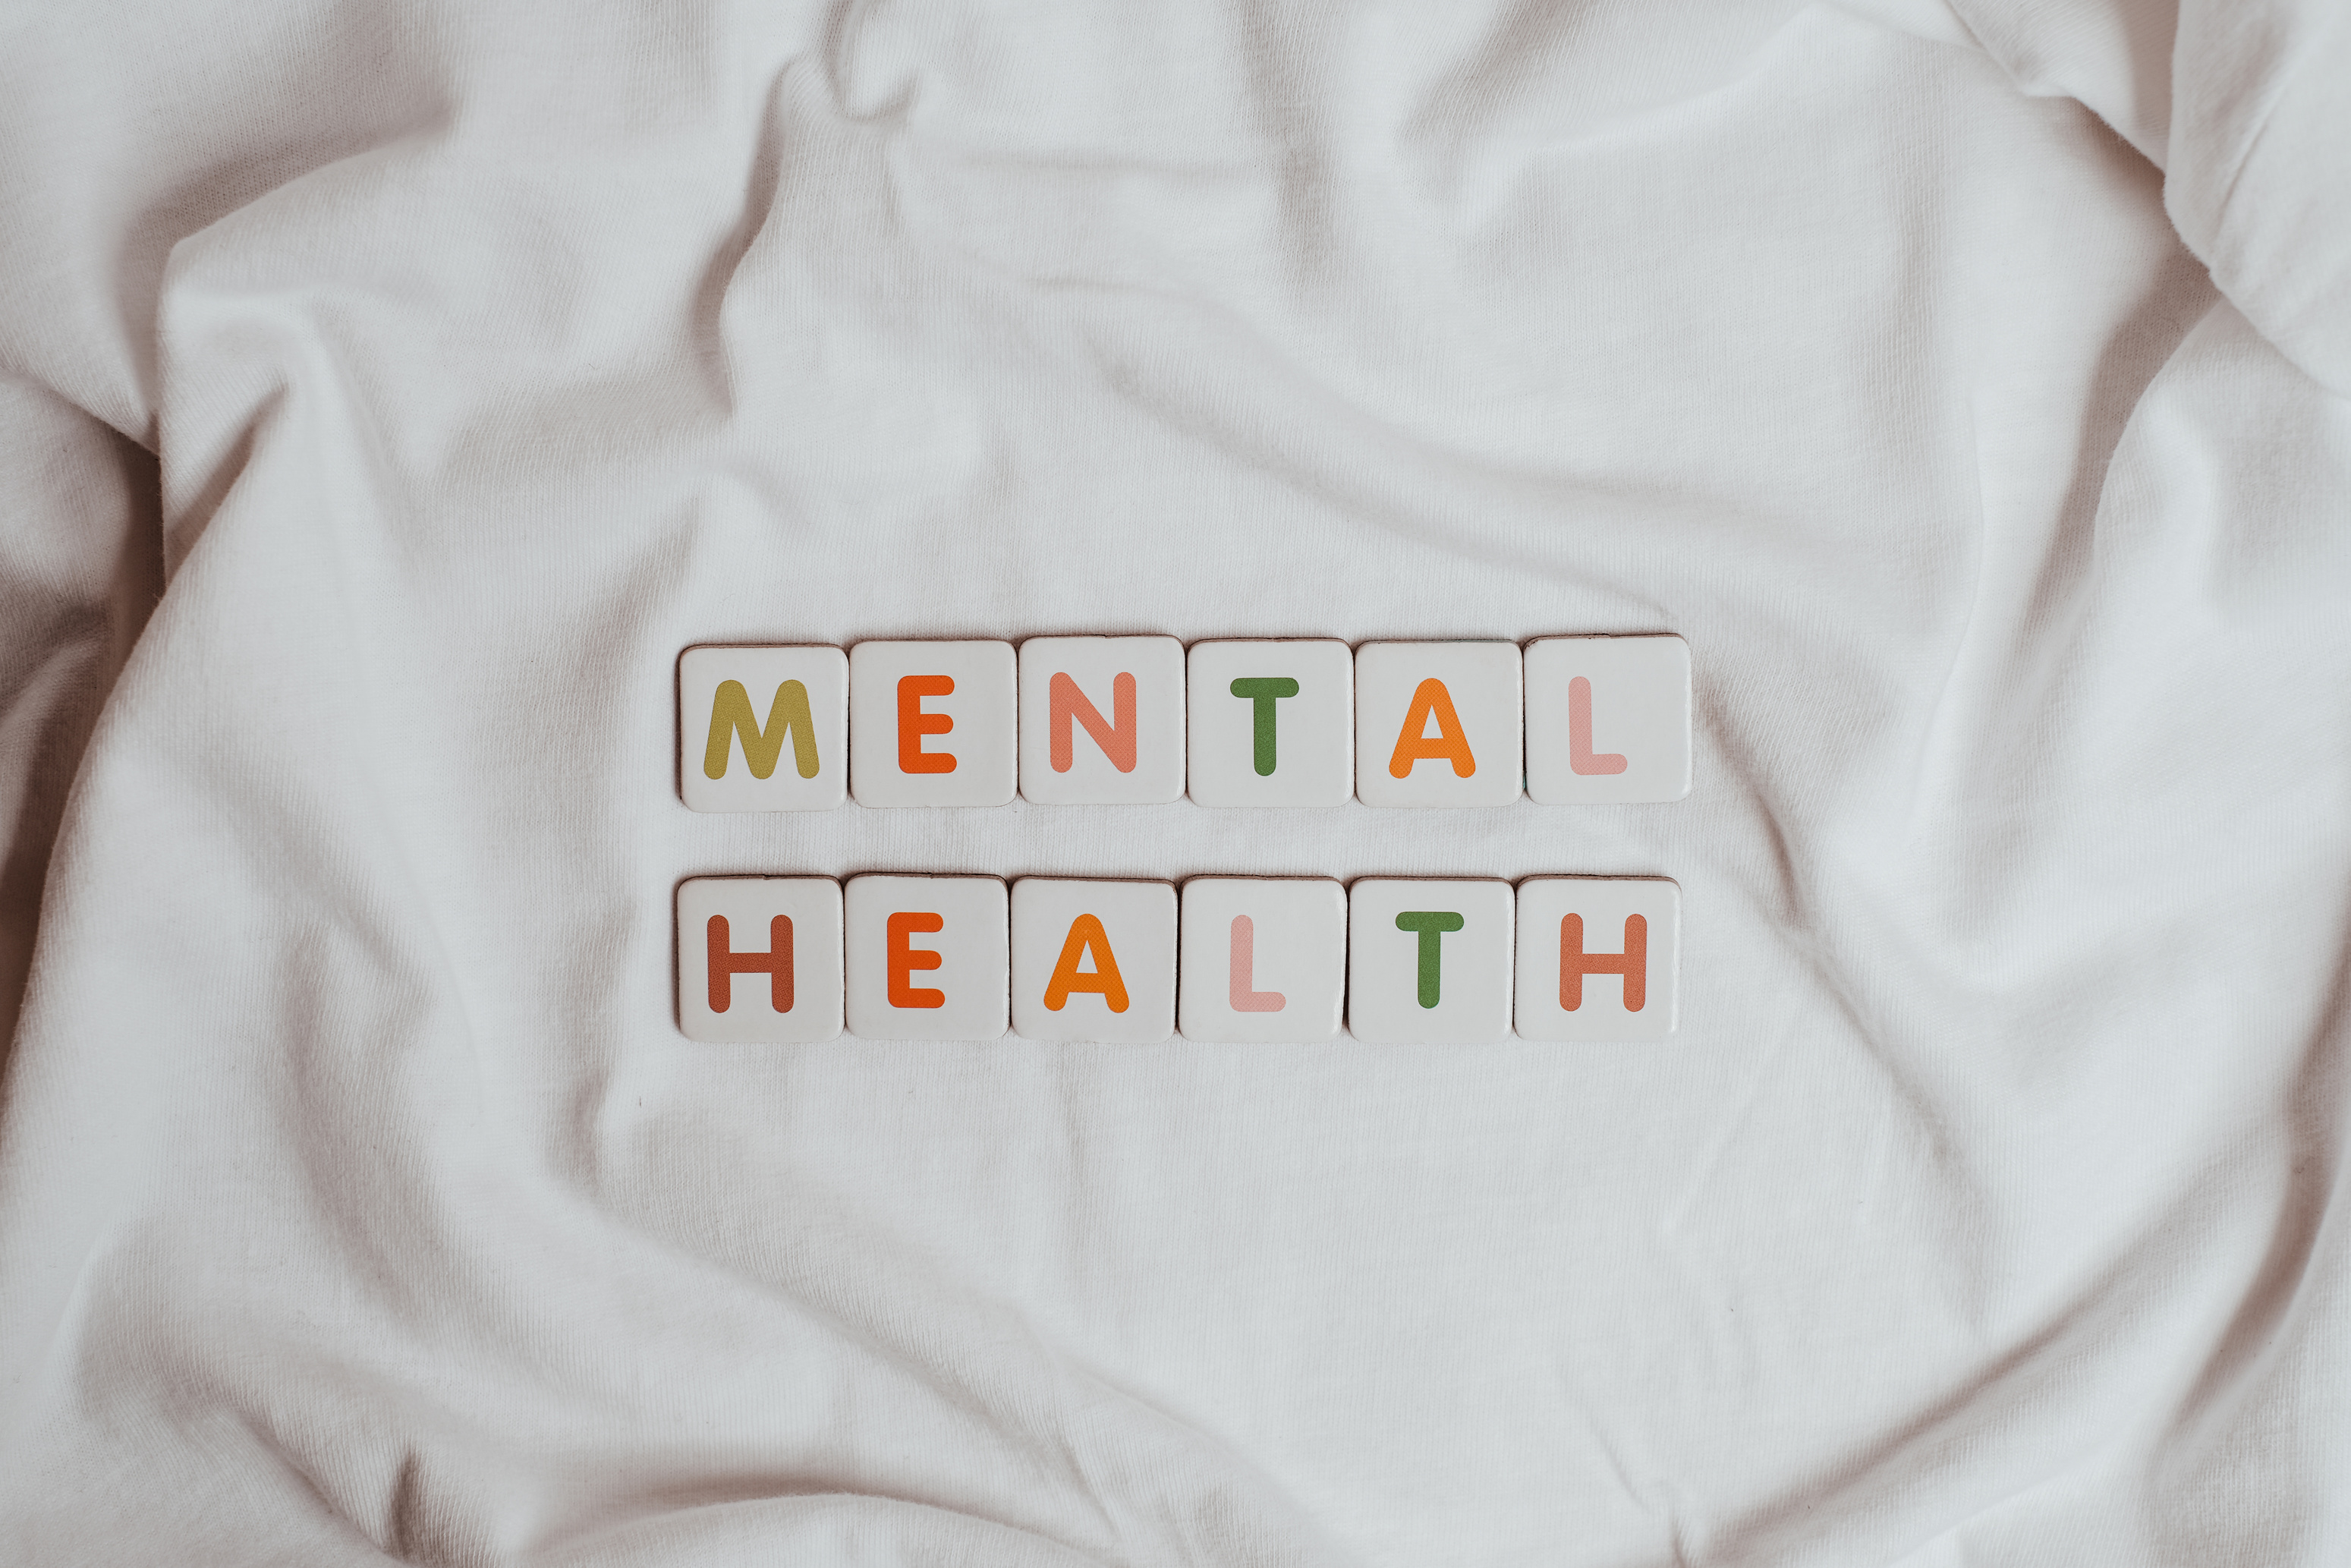 The Phrase Mental Health on a Sheet of Fabric